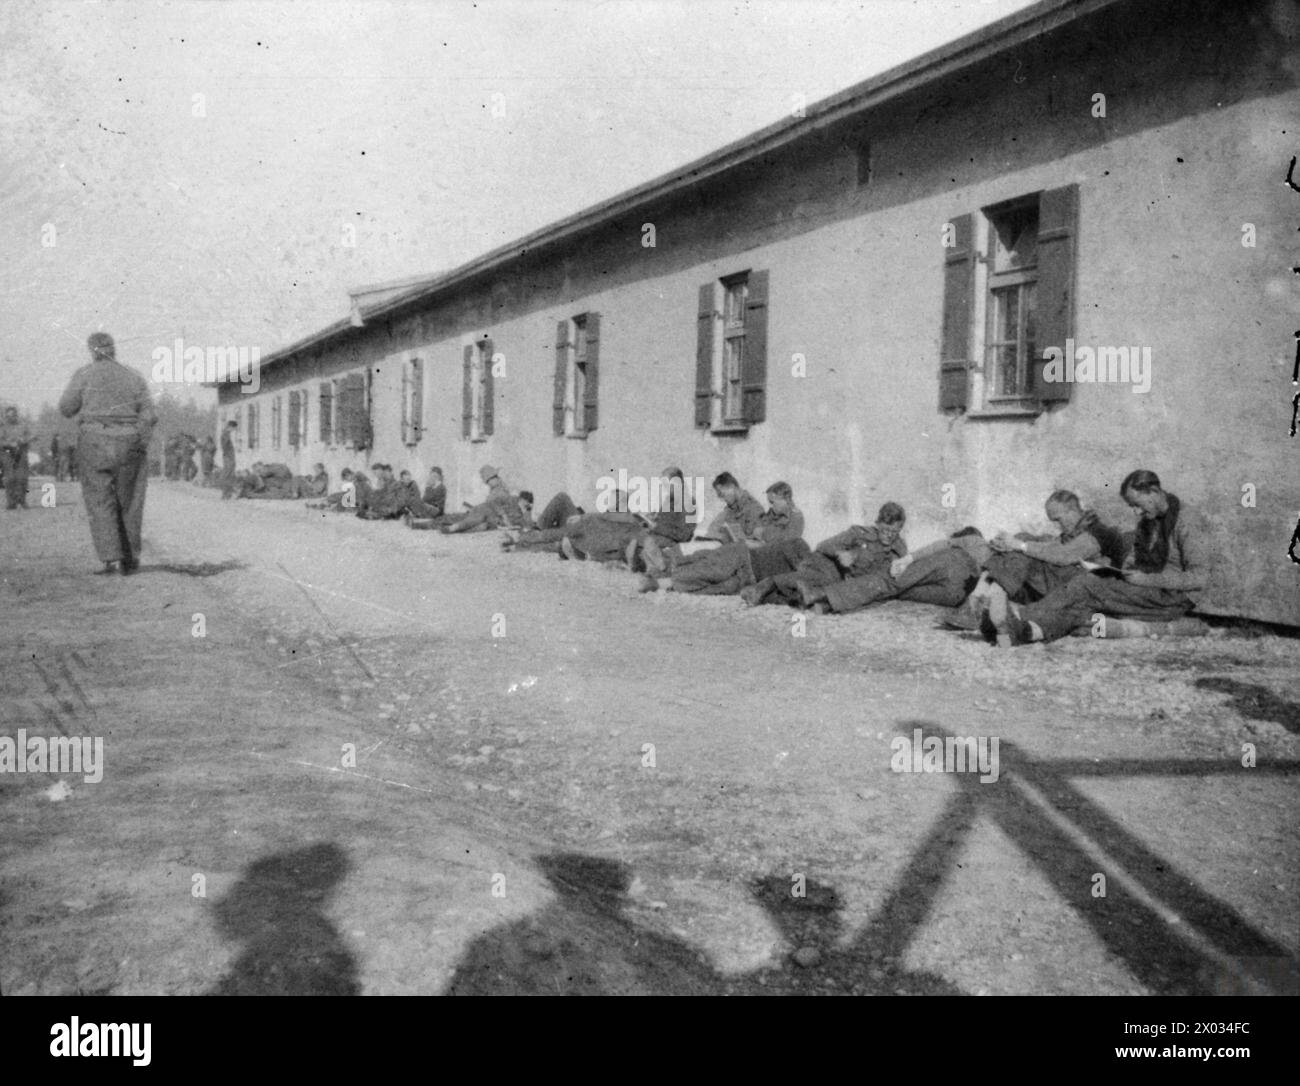 THE BRITISH ARMY IN NORTH-WEST EUROPE 1944-45 - A photograph taken covertly at Stalag VIIA at Mooseburg in November 1943, showing British POWs resting by the side of a hut Stock Photo